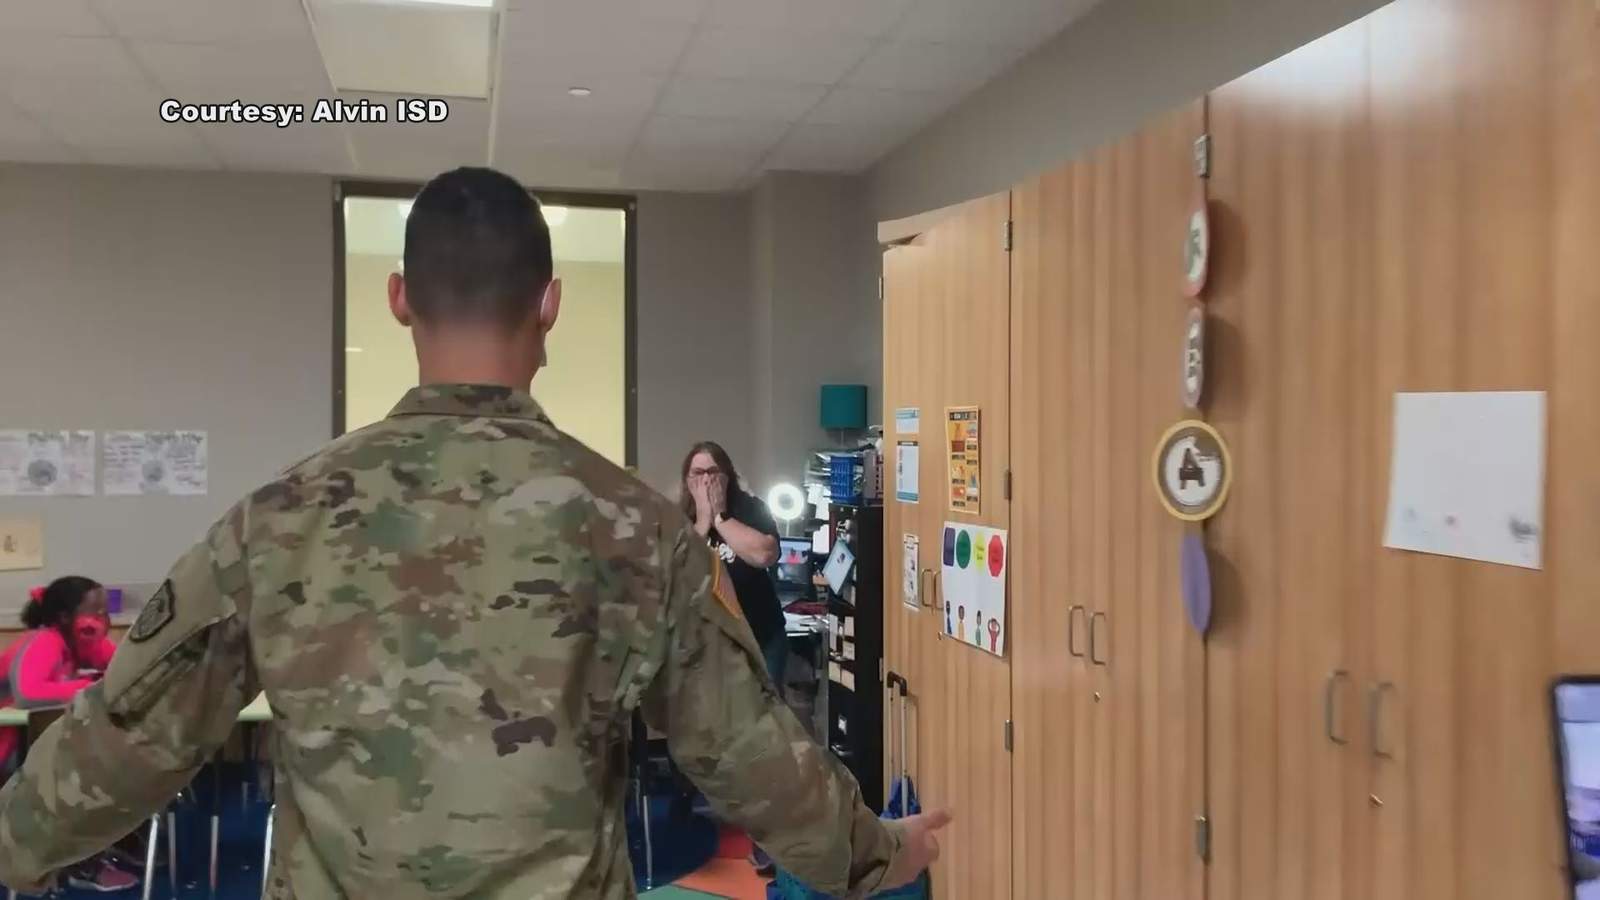 Heartwarming: Soldier surprises parents at Alvin ISD ahead of Thanksgiving